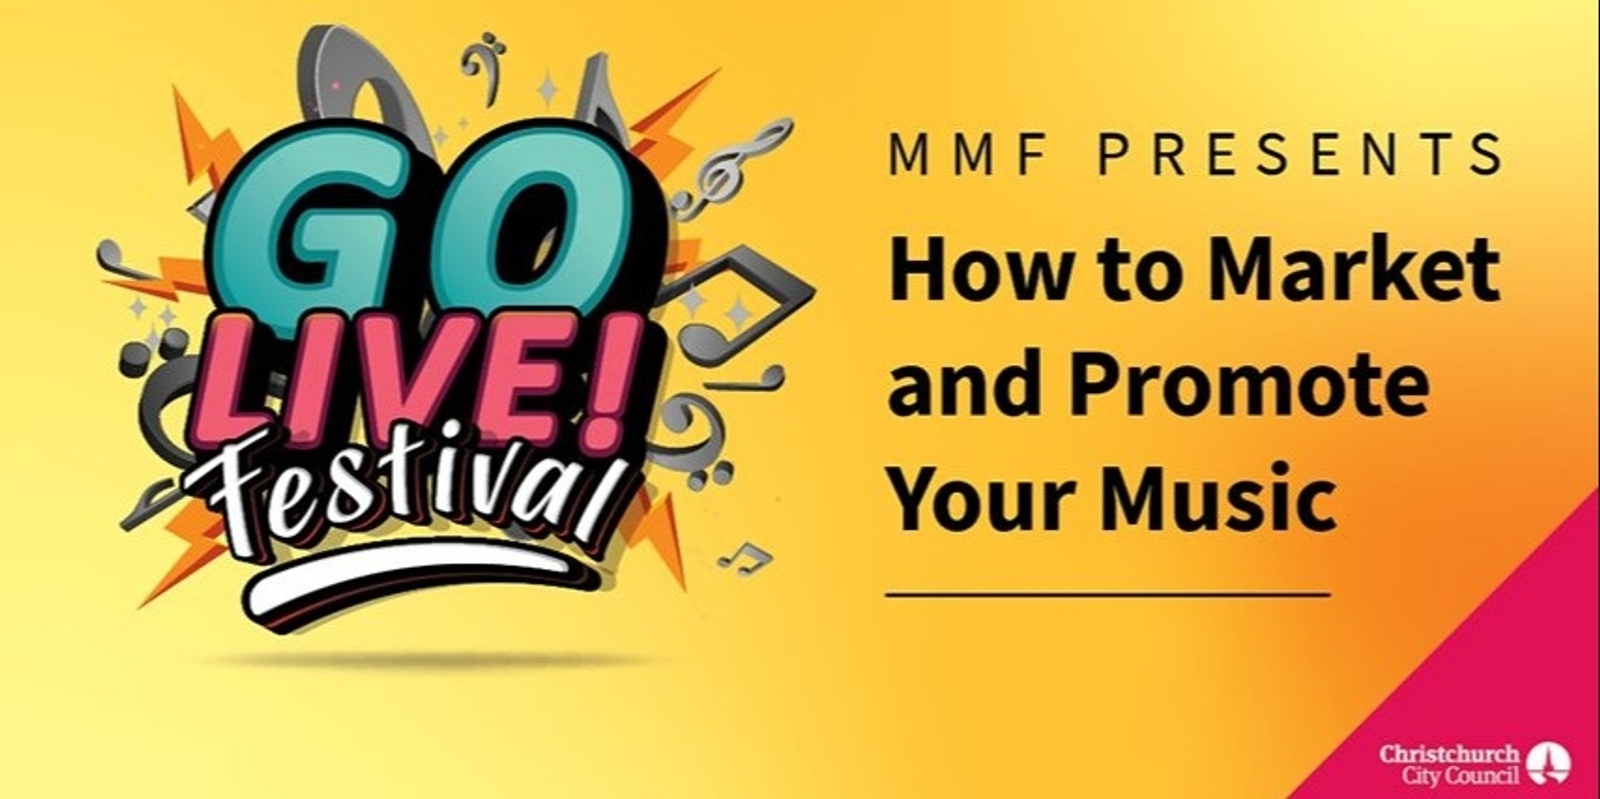 Banner image for Go Live! Festival - MMF presents "How To Market & Promote Your Music"